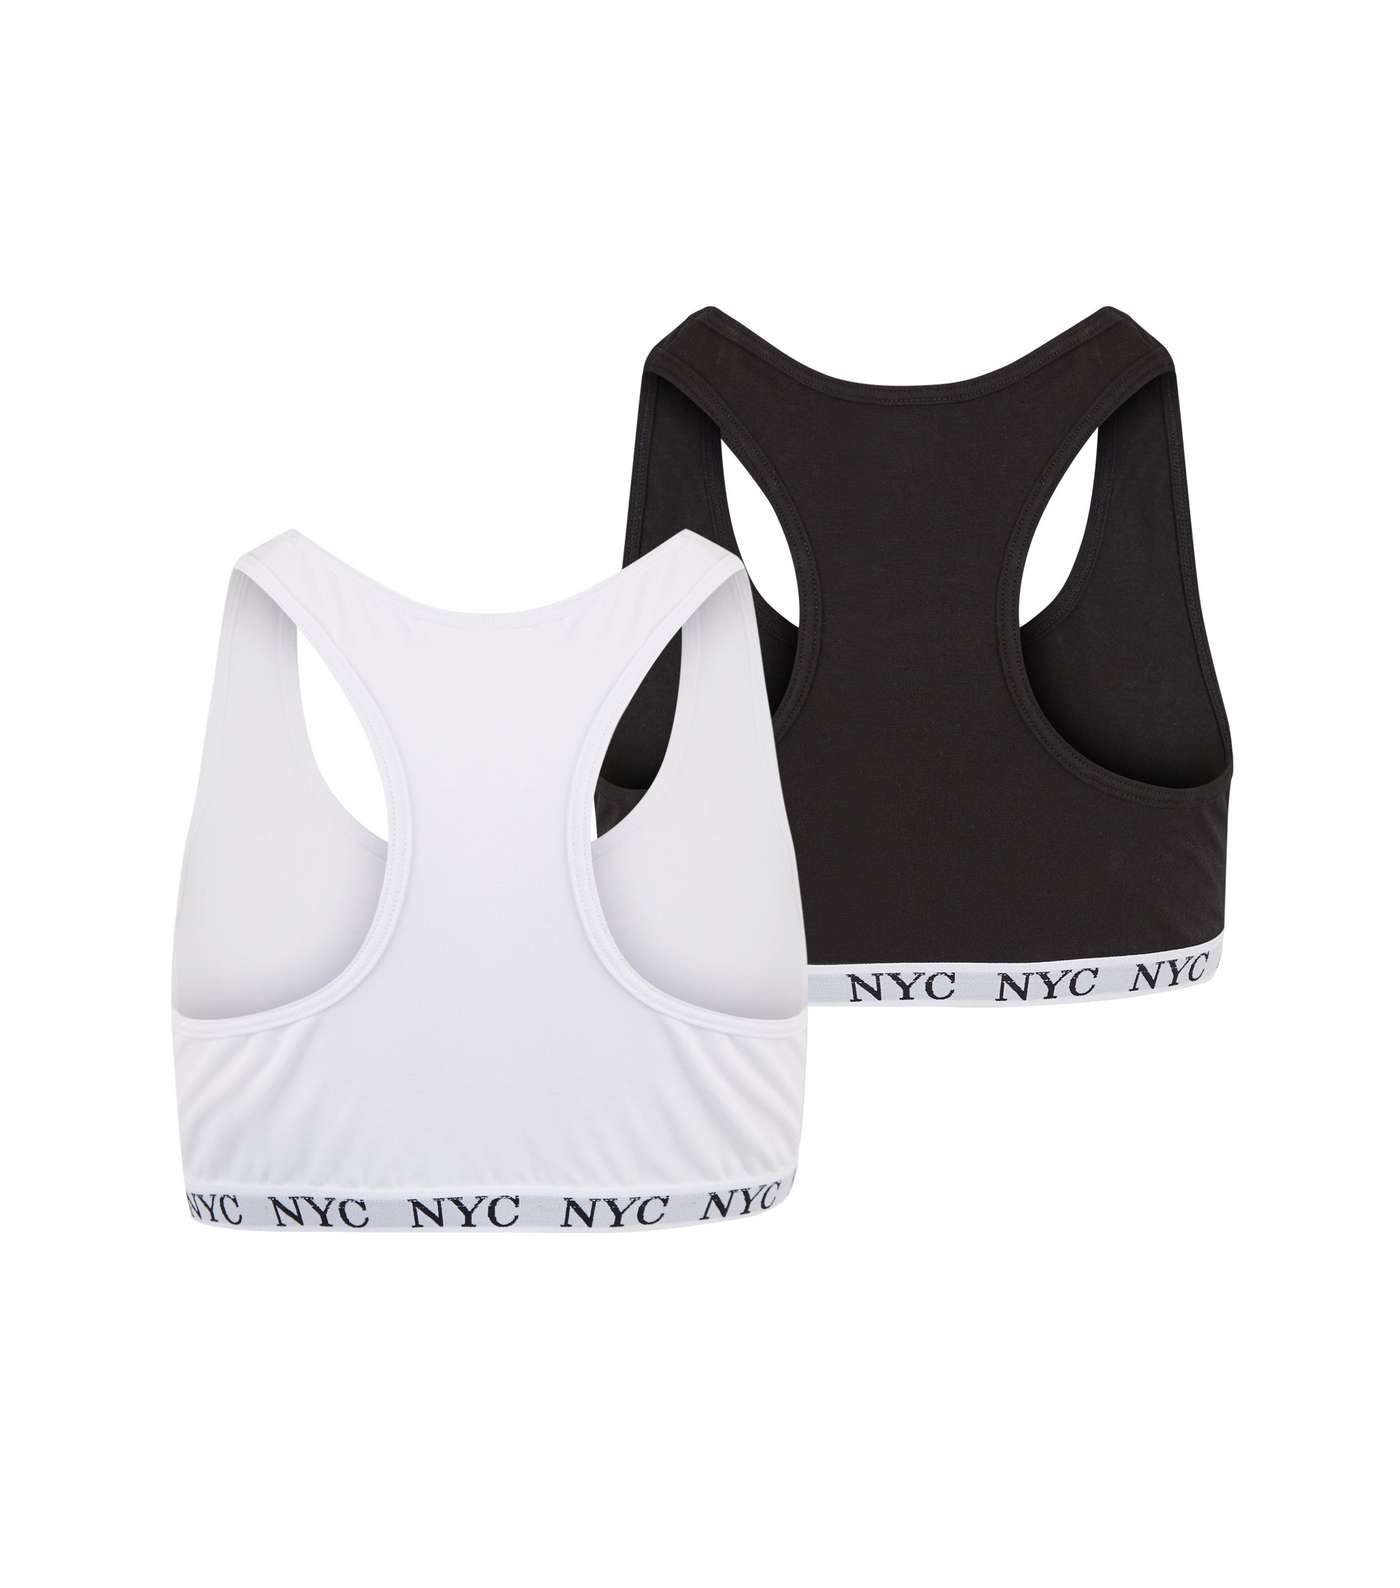 Girls 2 Pack Black and White NYC Slogan Crop Tops Image 2